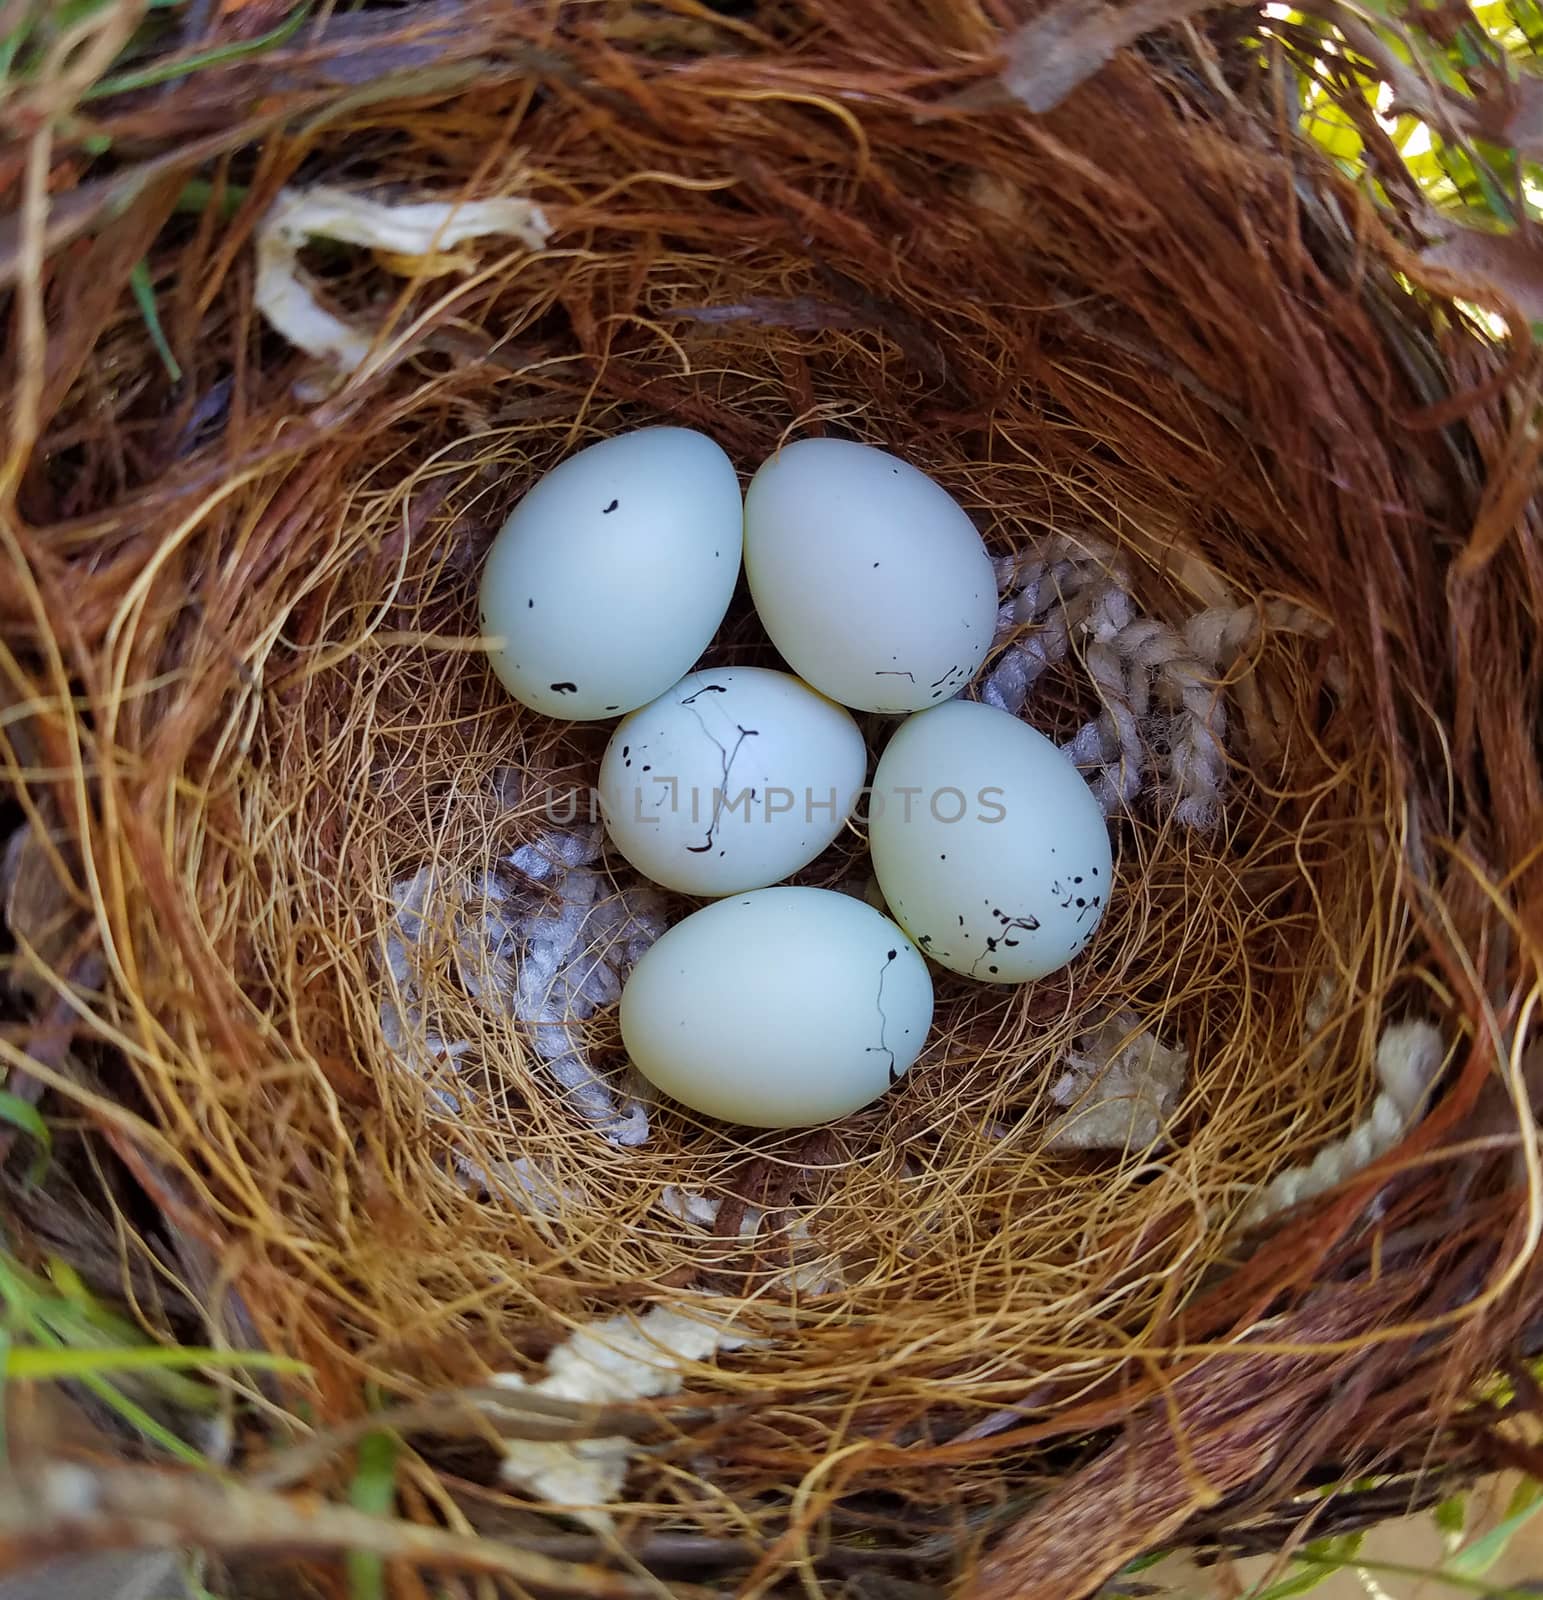 Five house finch eggs in the nest. House finch is a small bird native to western North America.